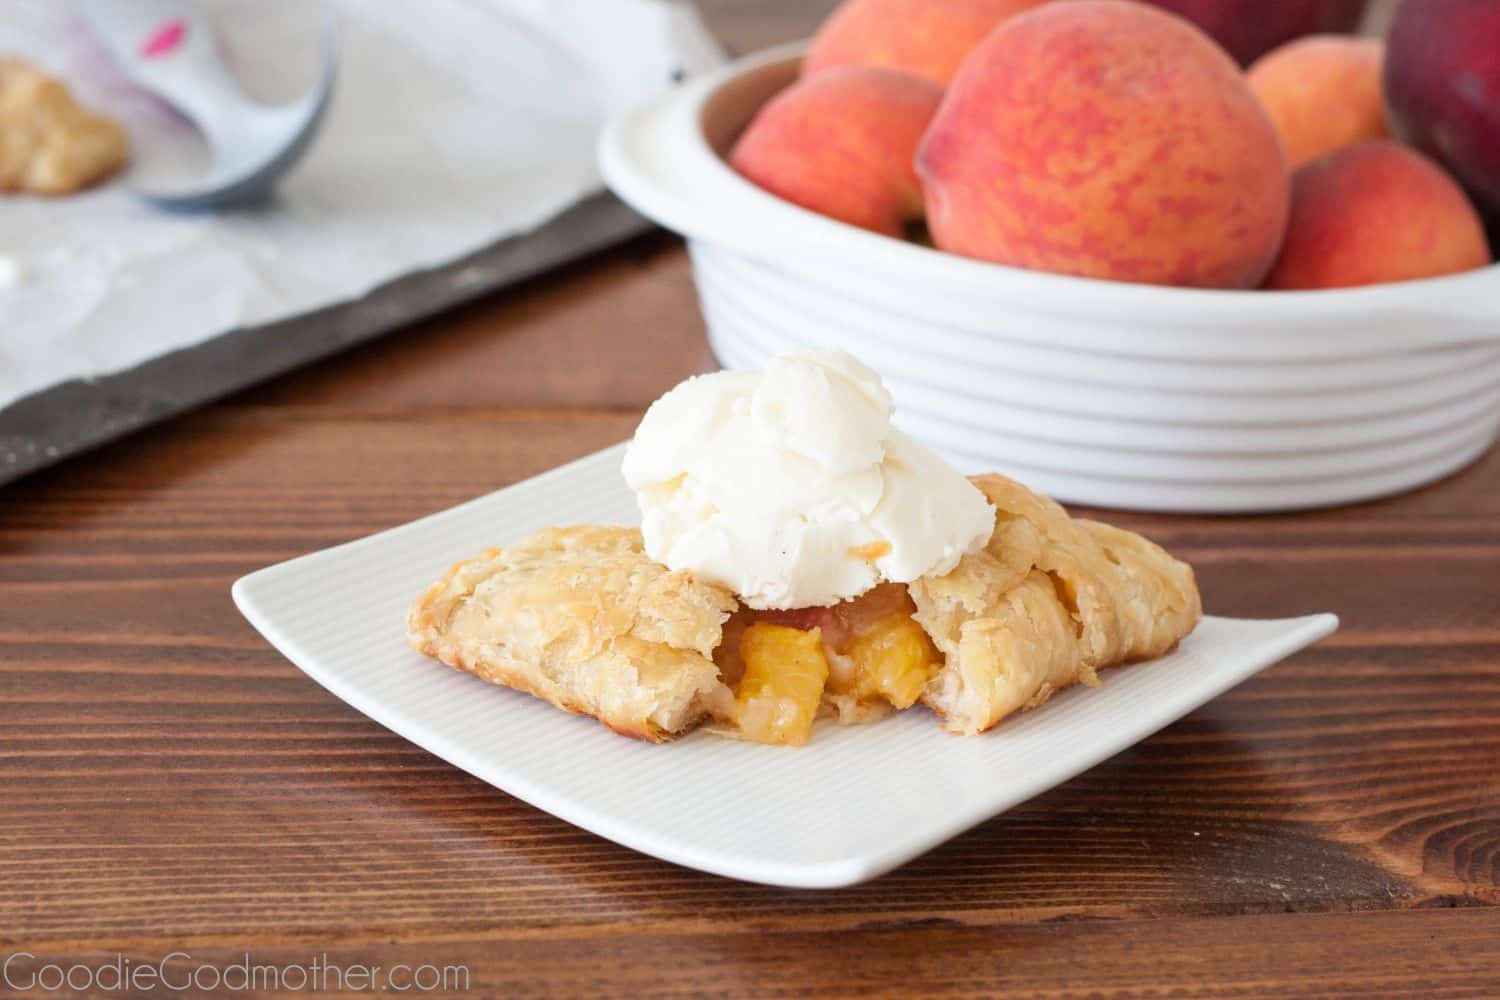 Summer peaches make a perfect filling for flaky peach hand pies with an all butter crust. Recipe on GoodieGodmother.com